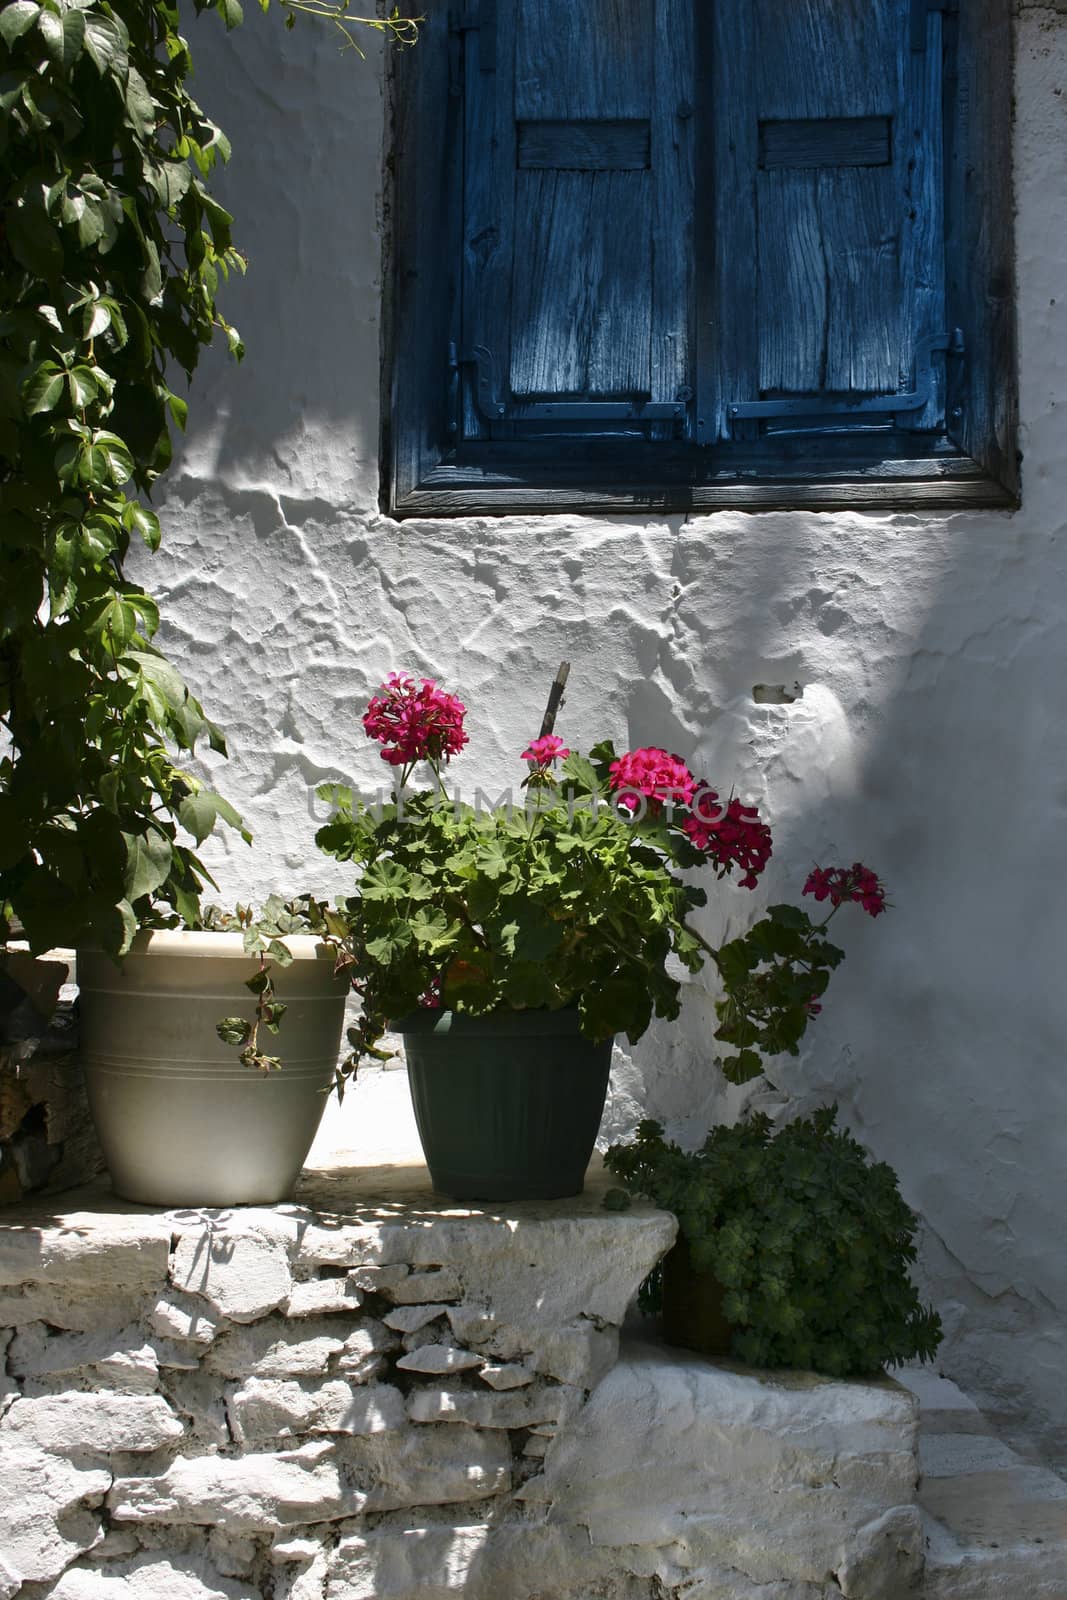 Blue greek window shutters and red geranium against white plaster stone wall